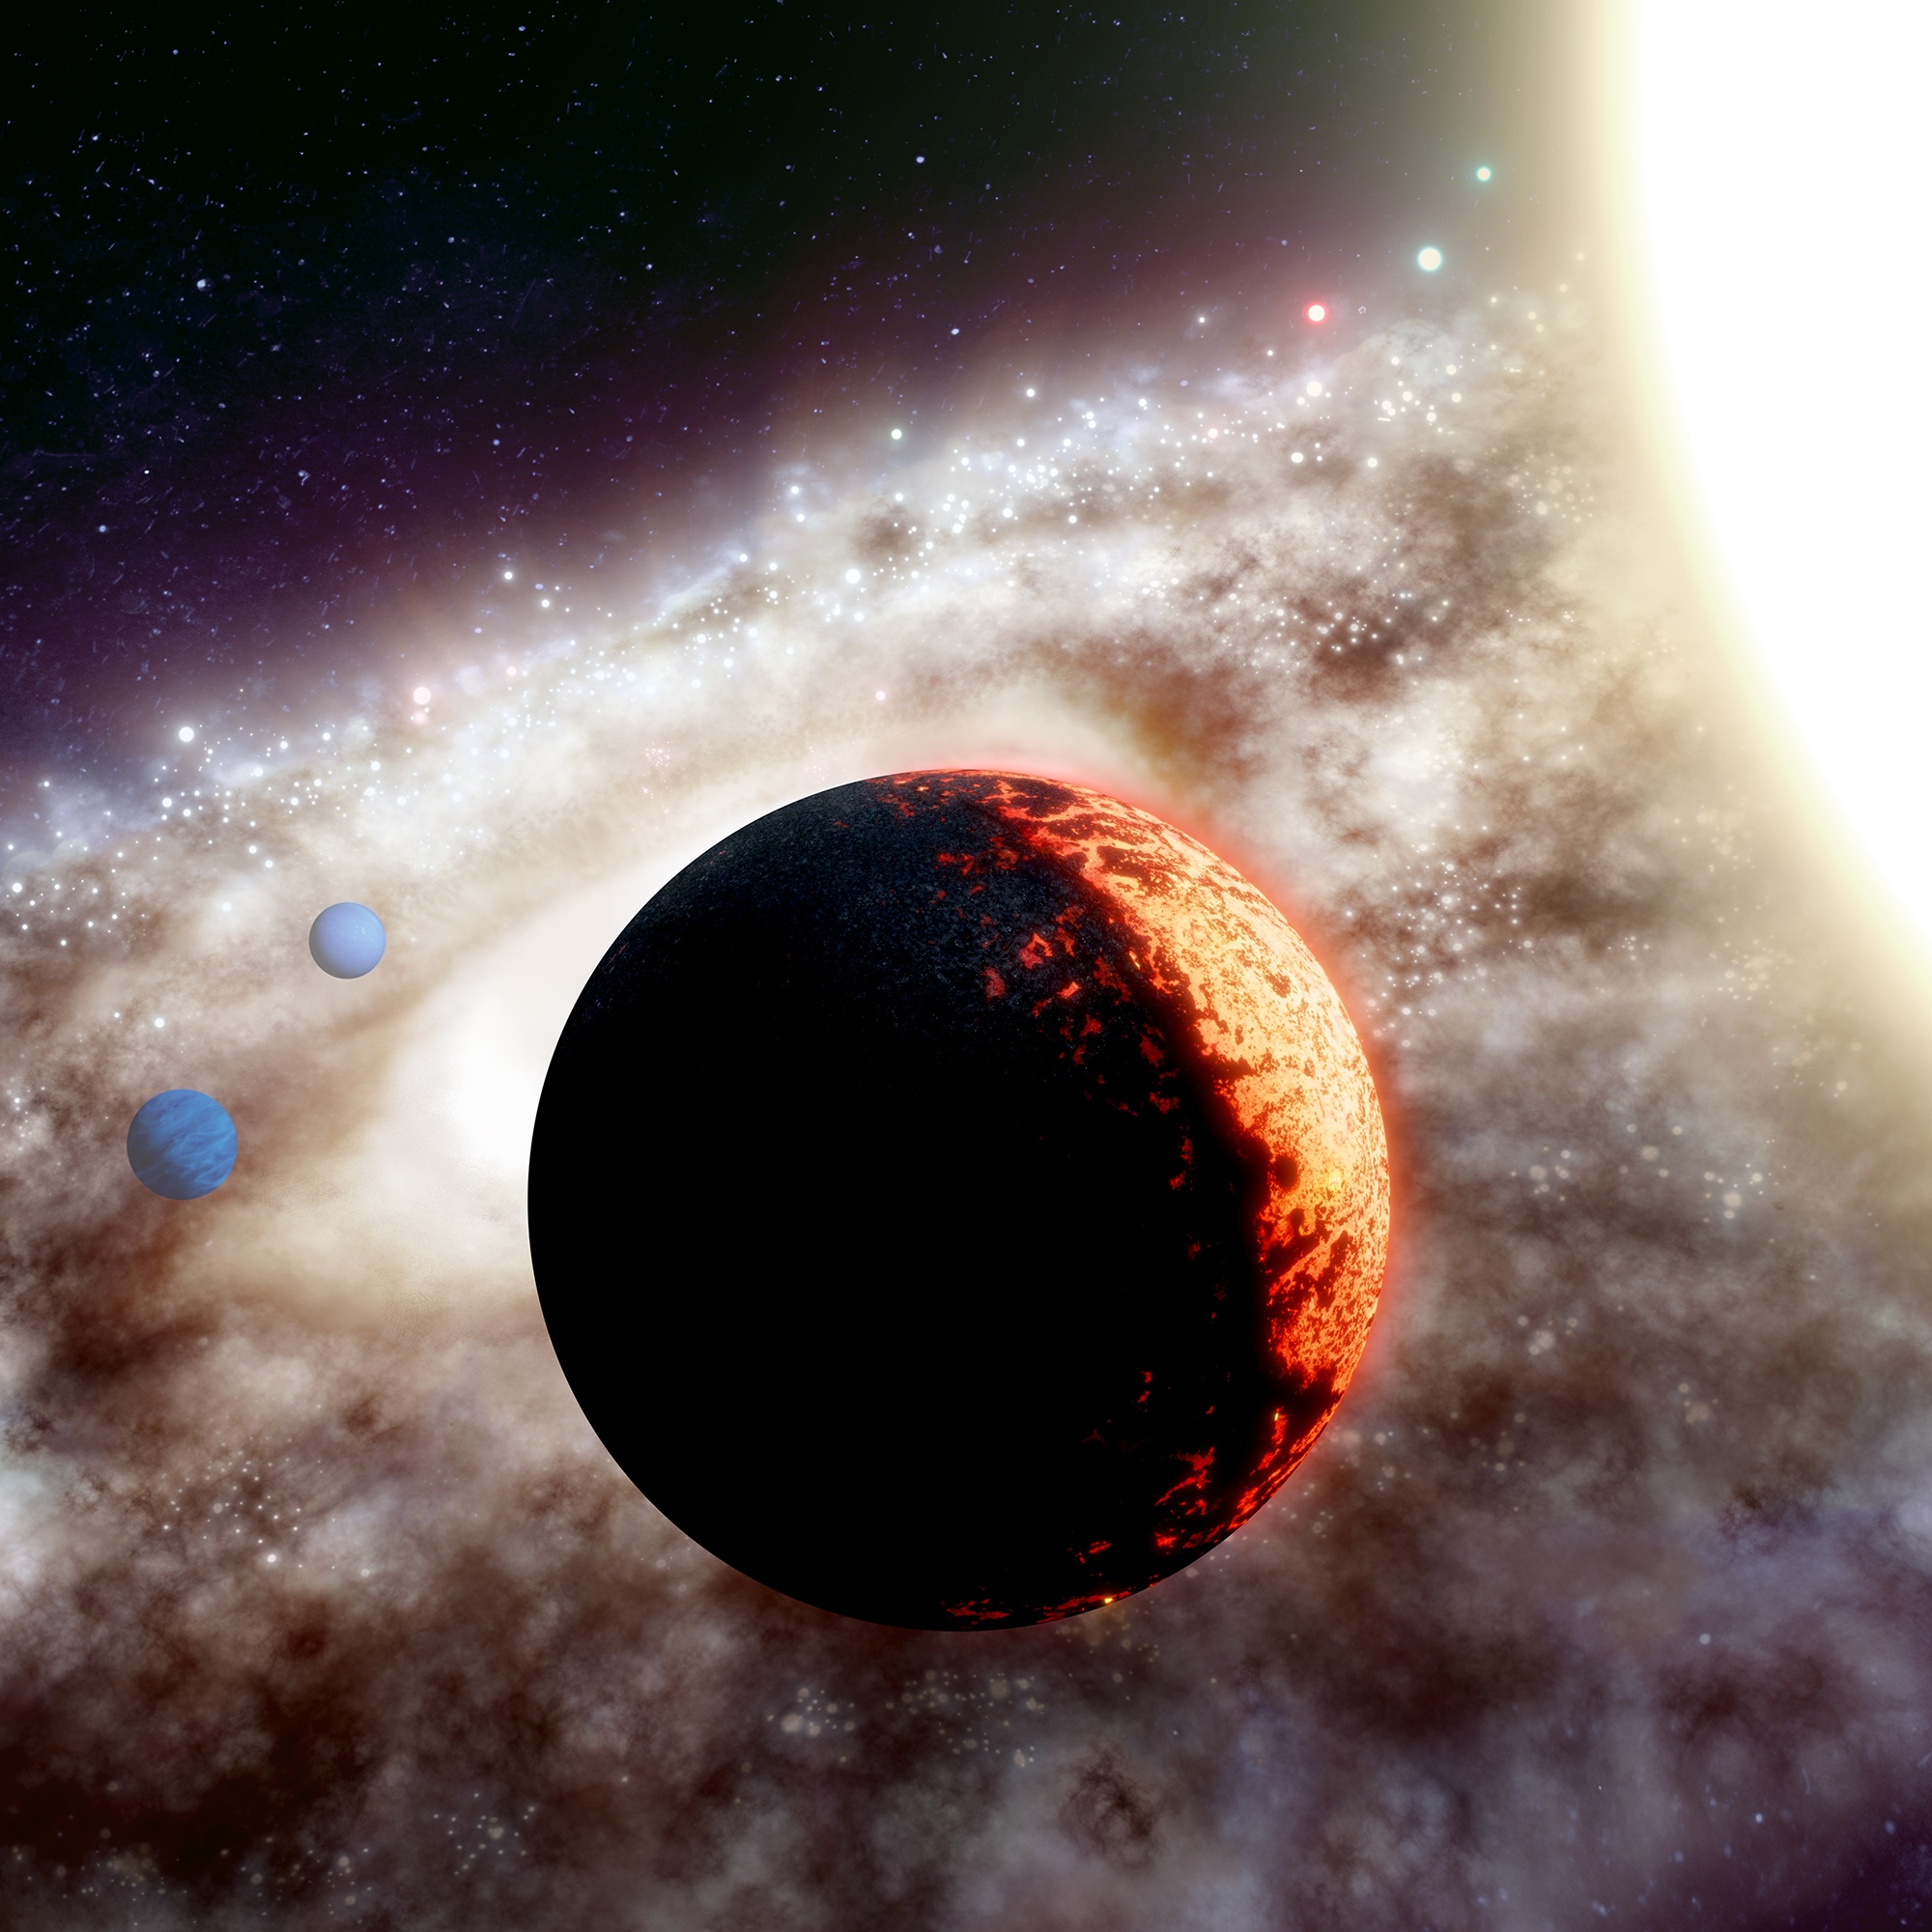 One of the oldest stars in the Milky Way has a planet.  Rocky planets form almost the beginning of the universe